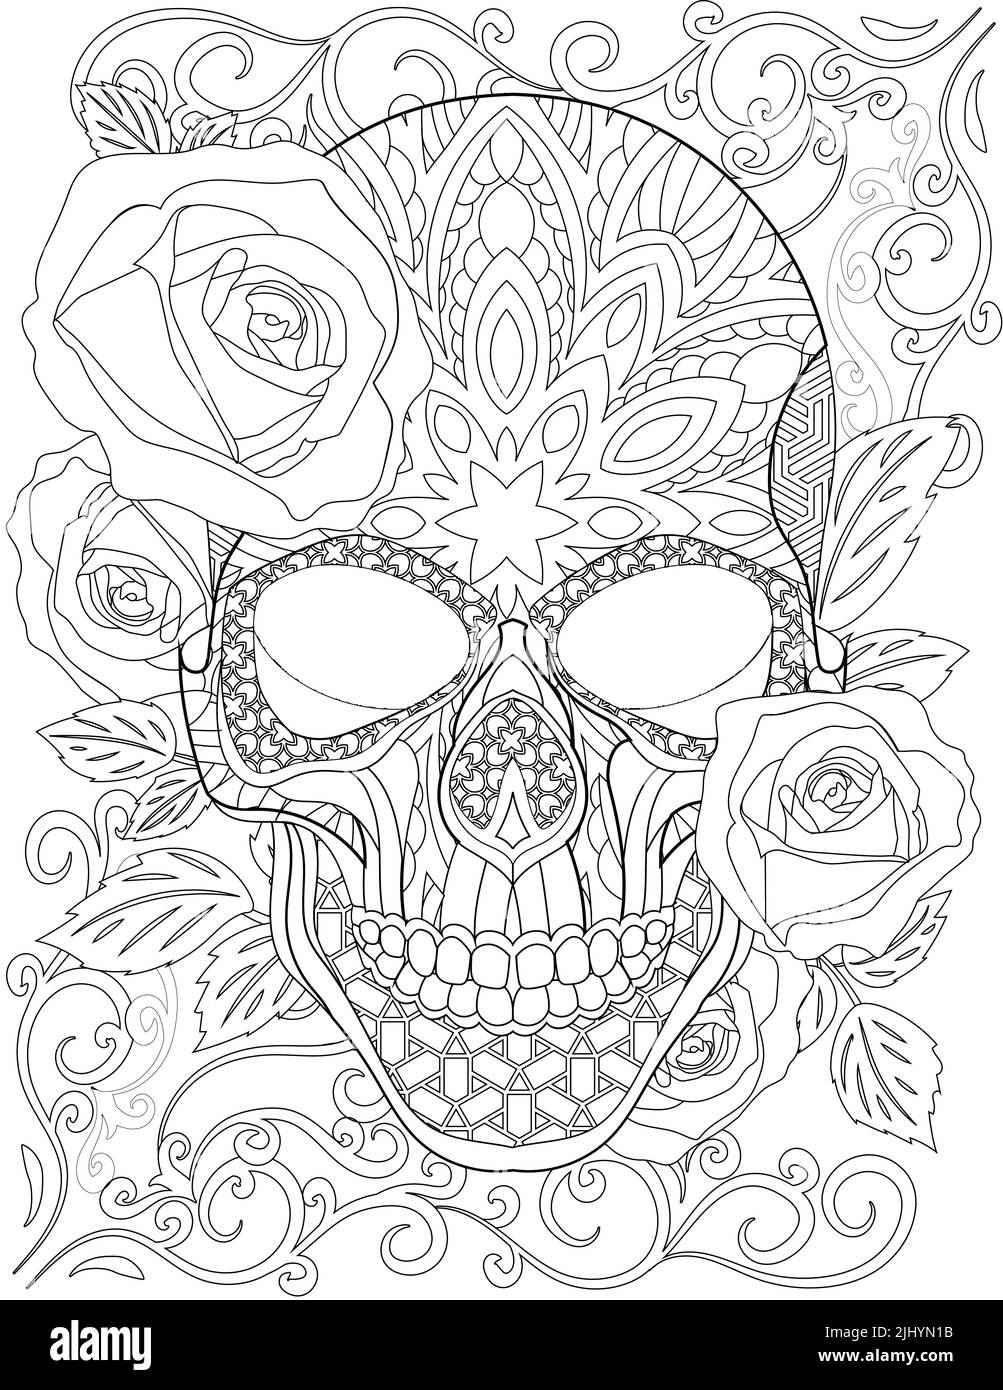 A skull Tattoo Drawing Surrounded By Roses And Eaves With His Mouth Closed Stock Photo